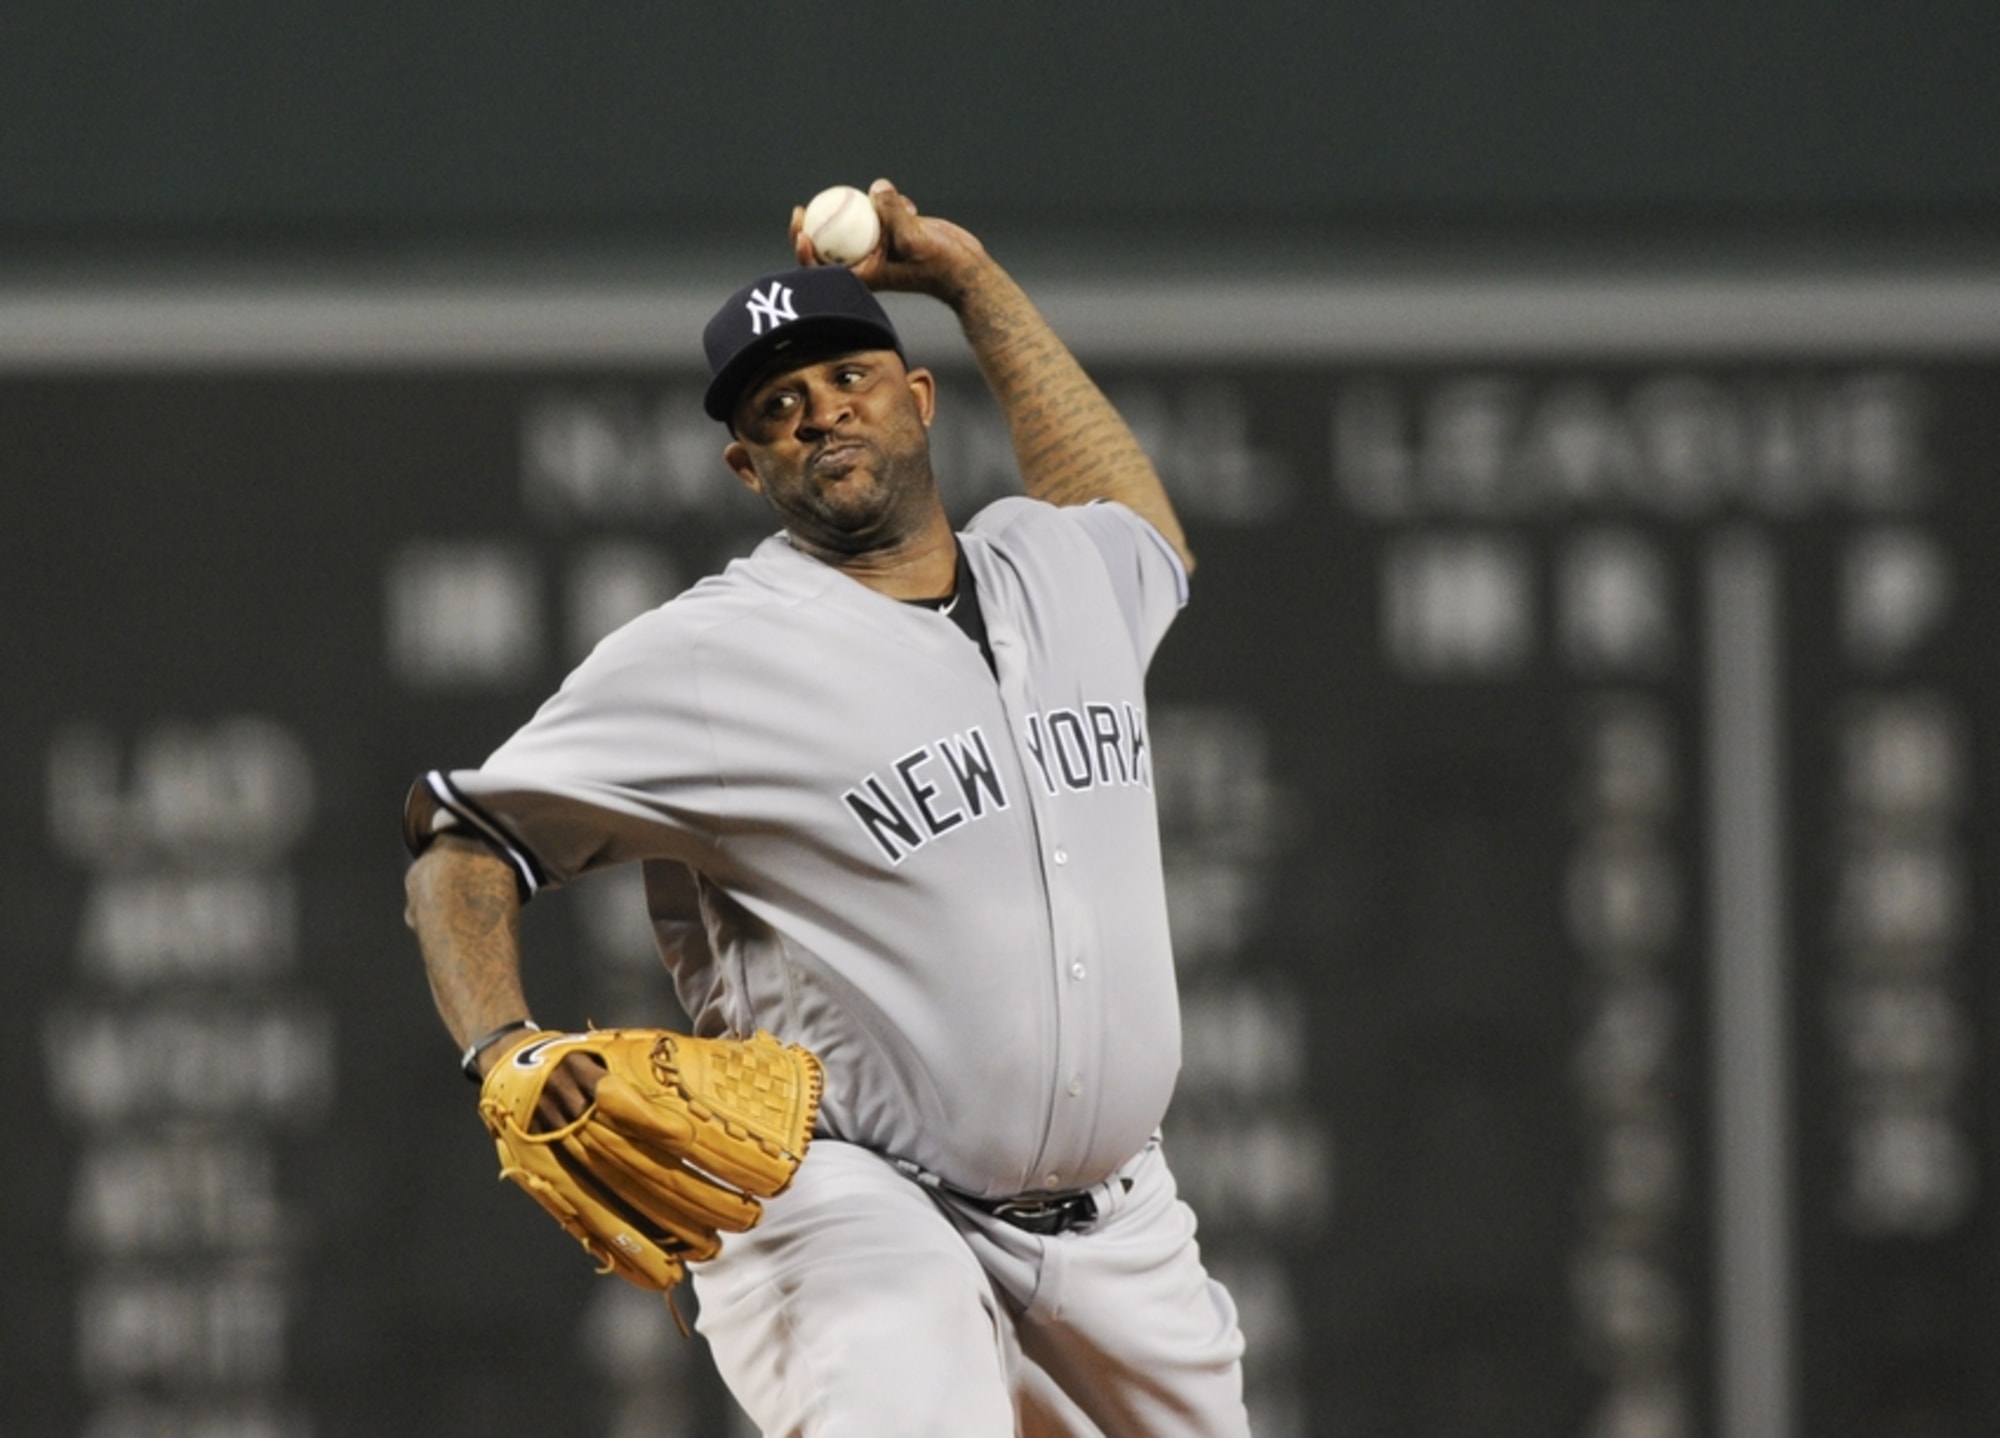 New York Yankees starting pitcher CC Sabathia wipes his face on